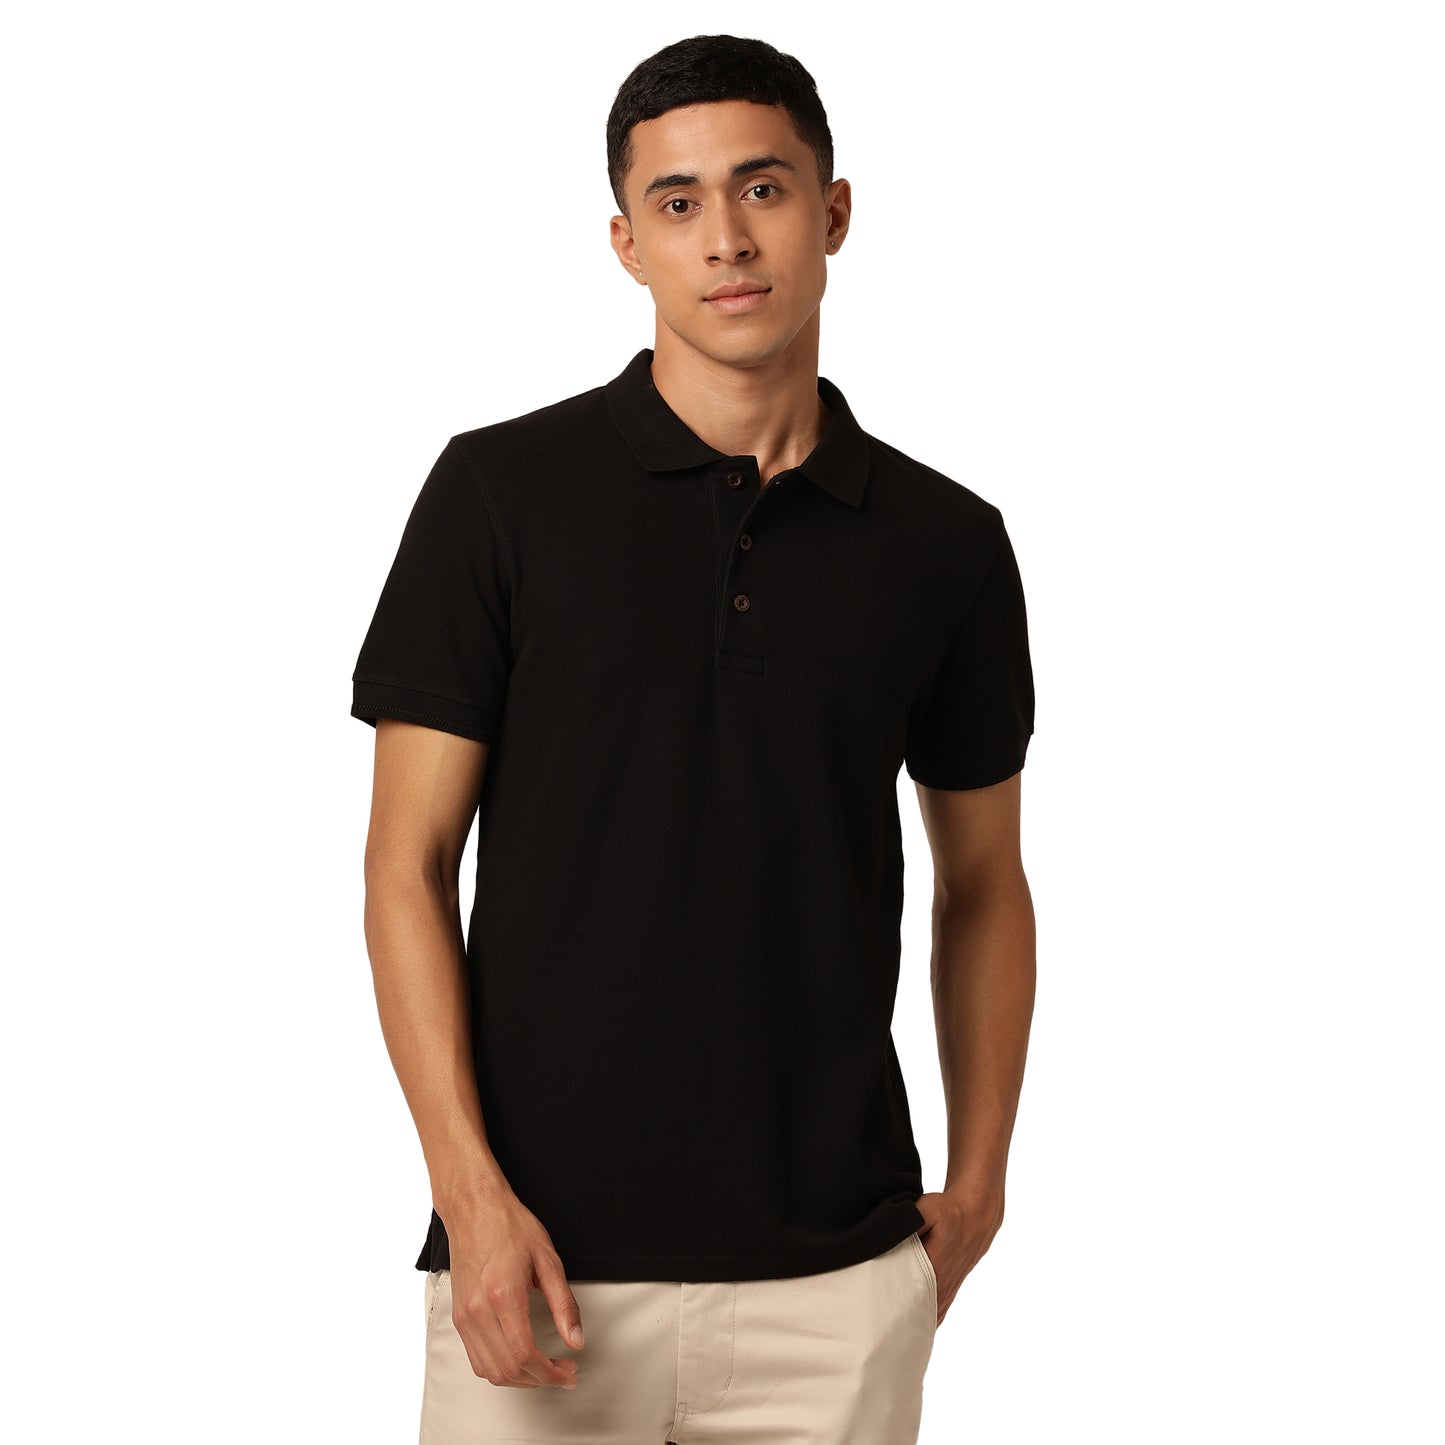 Club Combo Polo Neck T-shirts (Pack of 4)